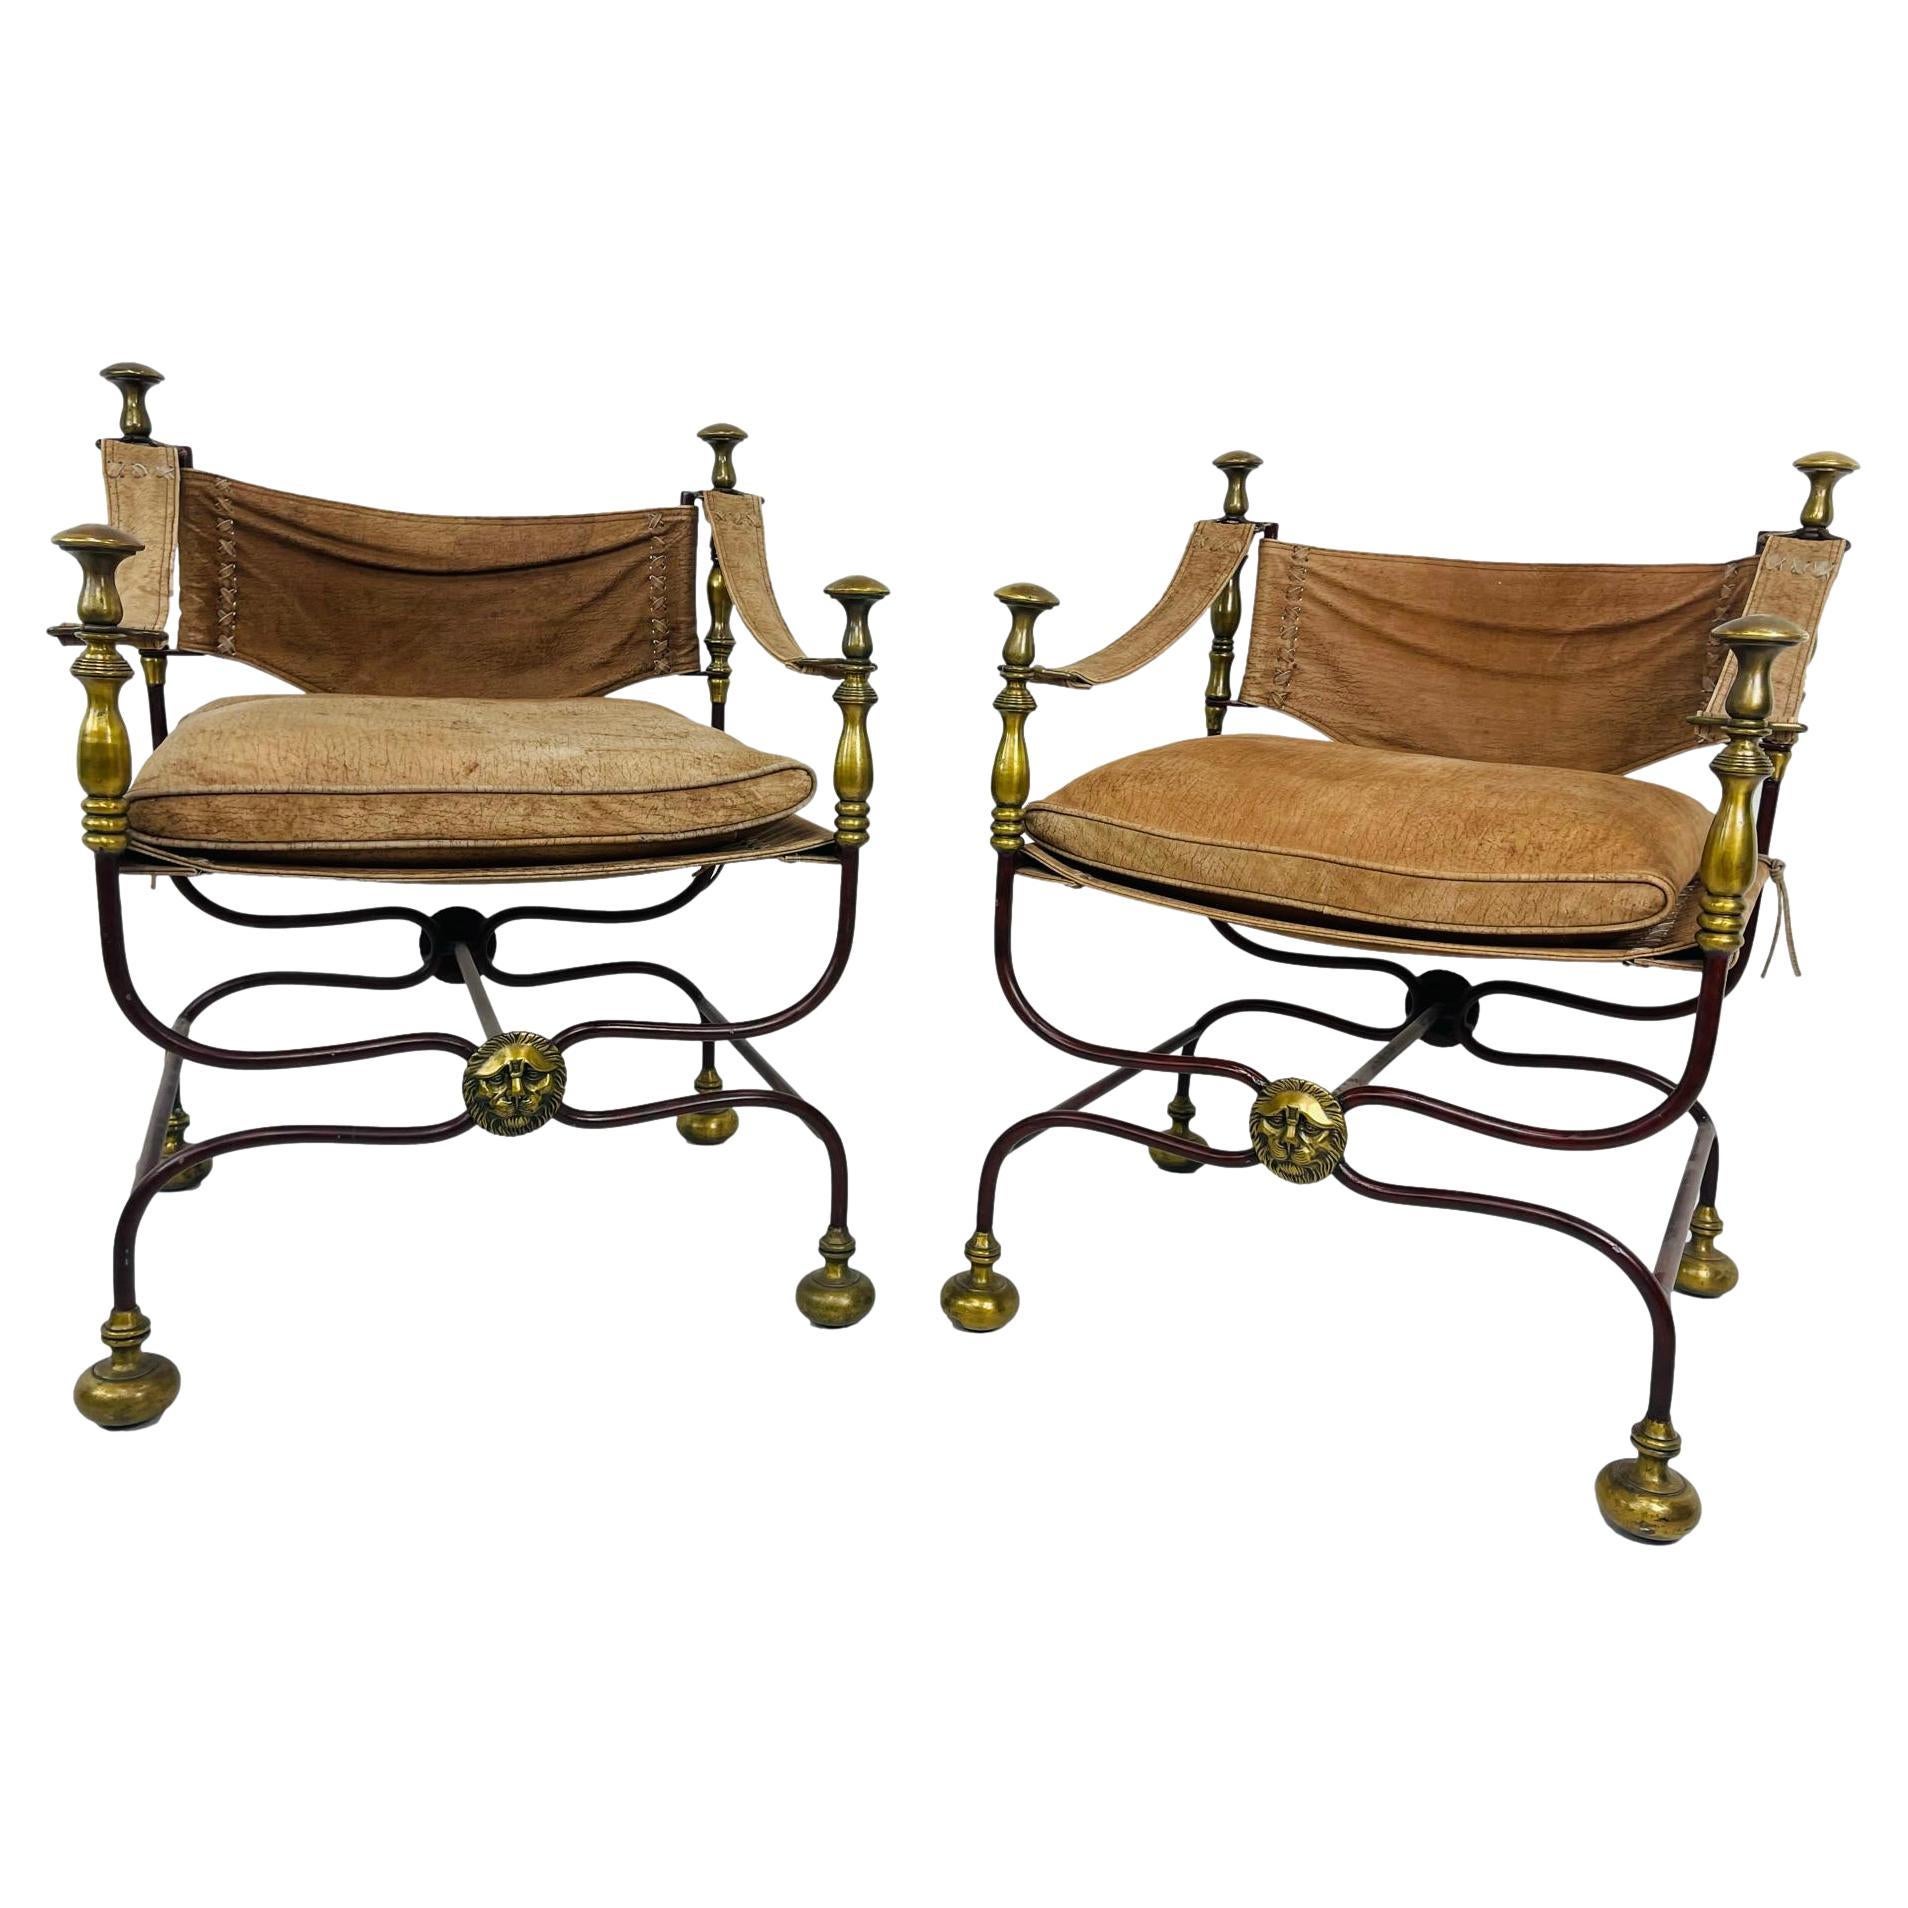 Pair of Antique Italian Leather and Iron Campaign Chairs